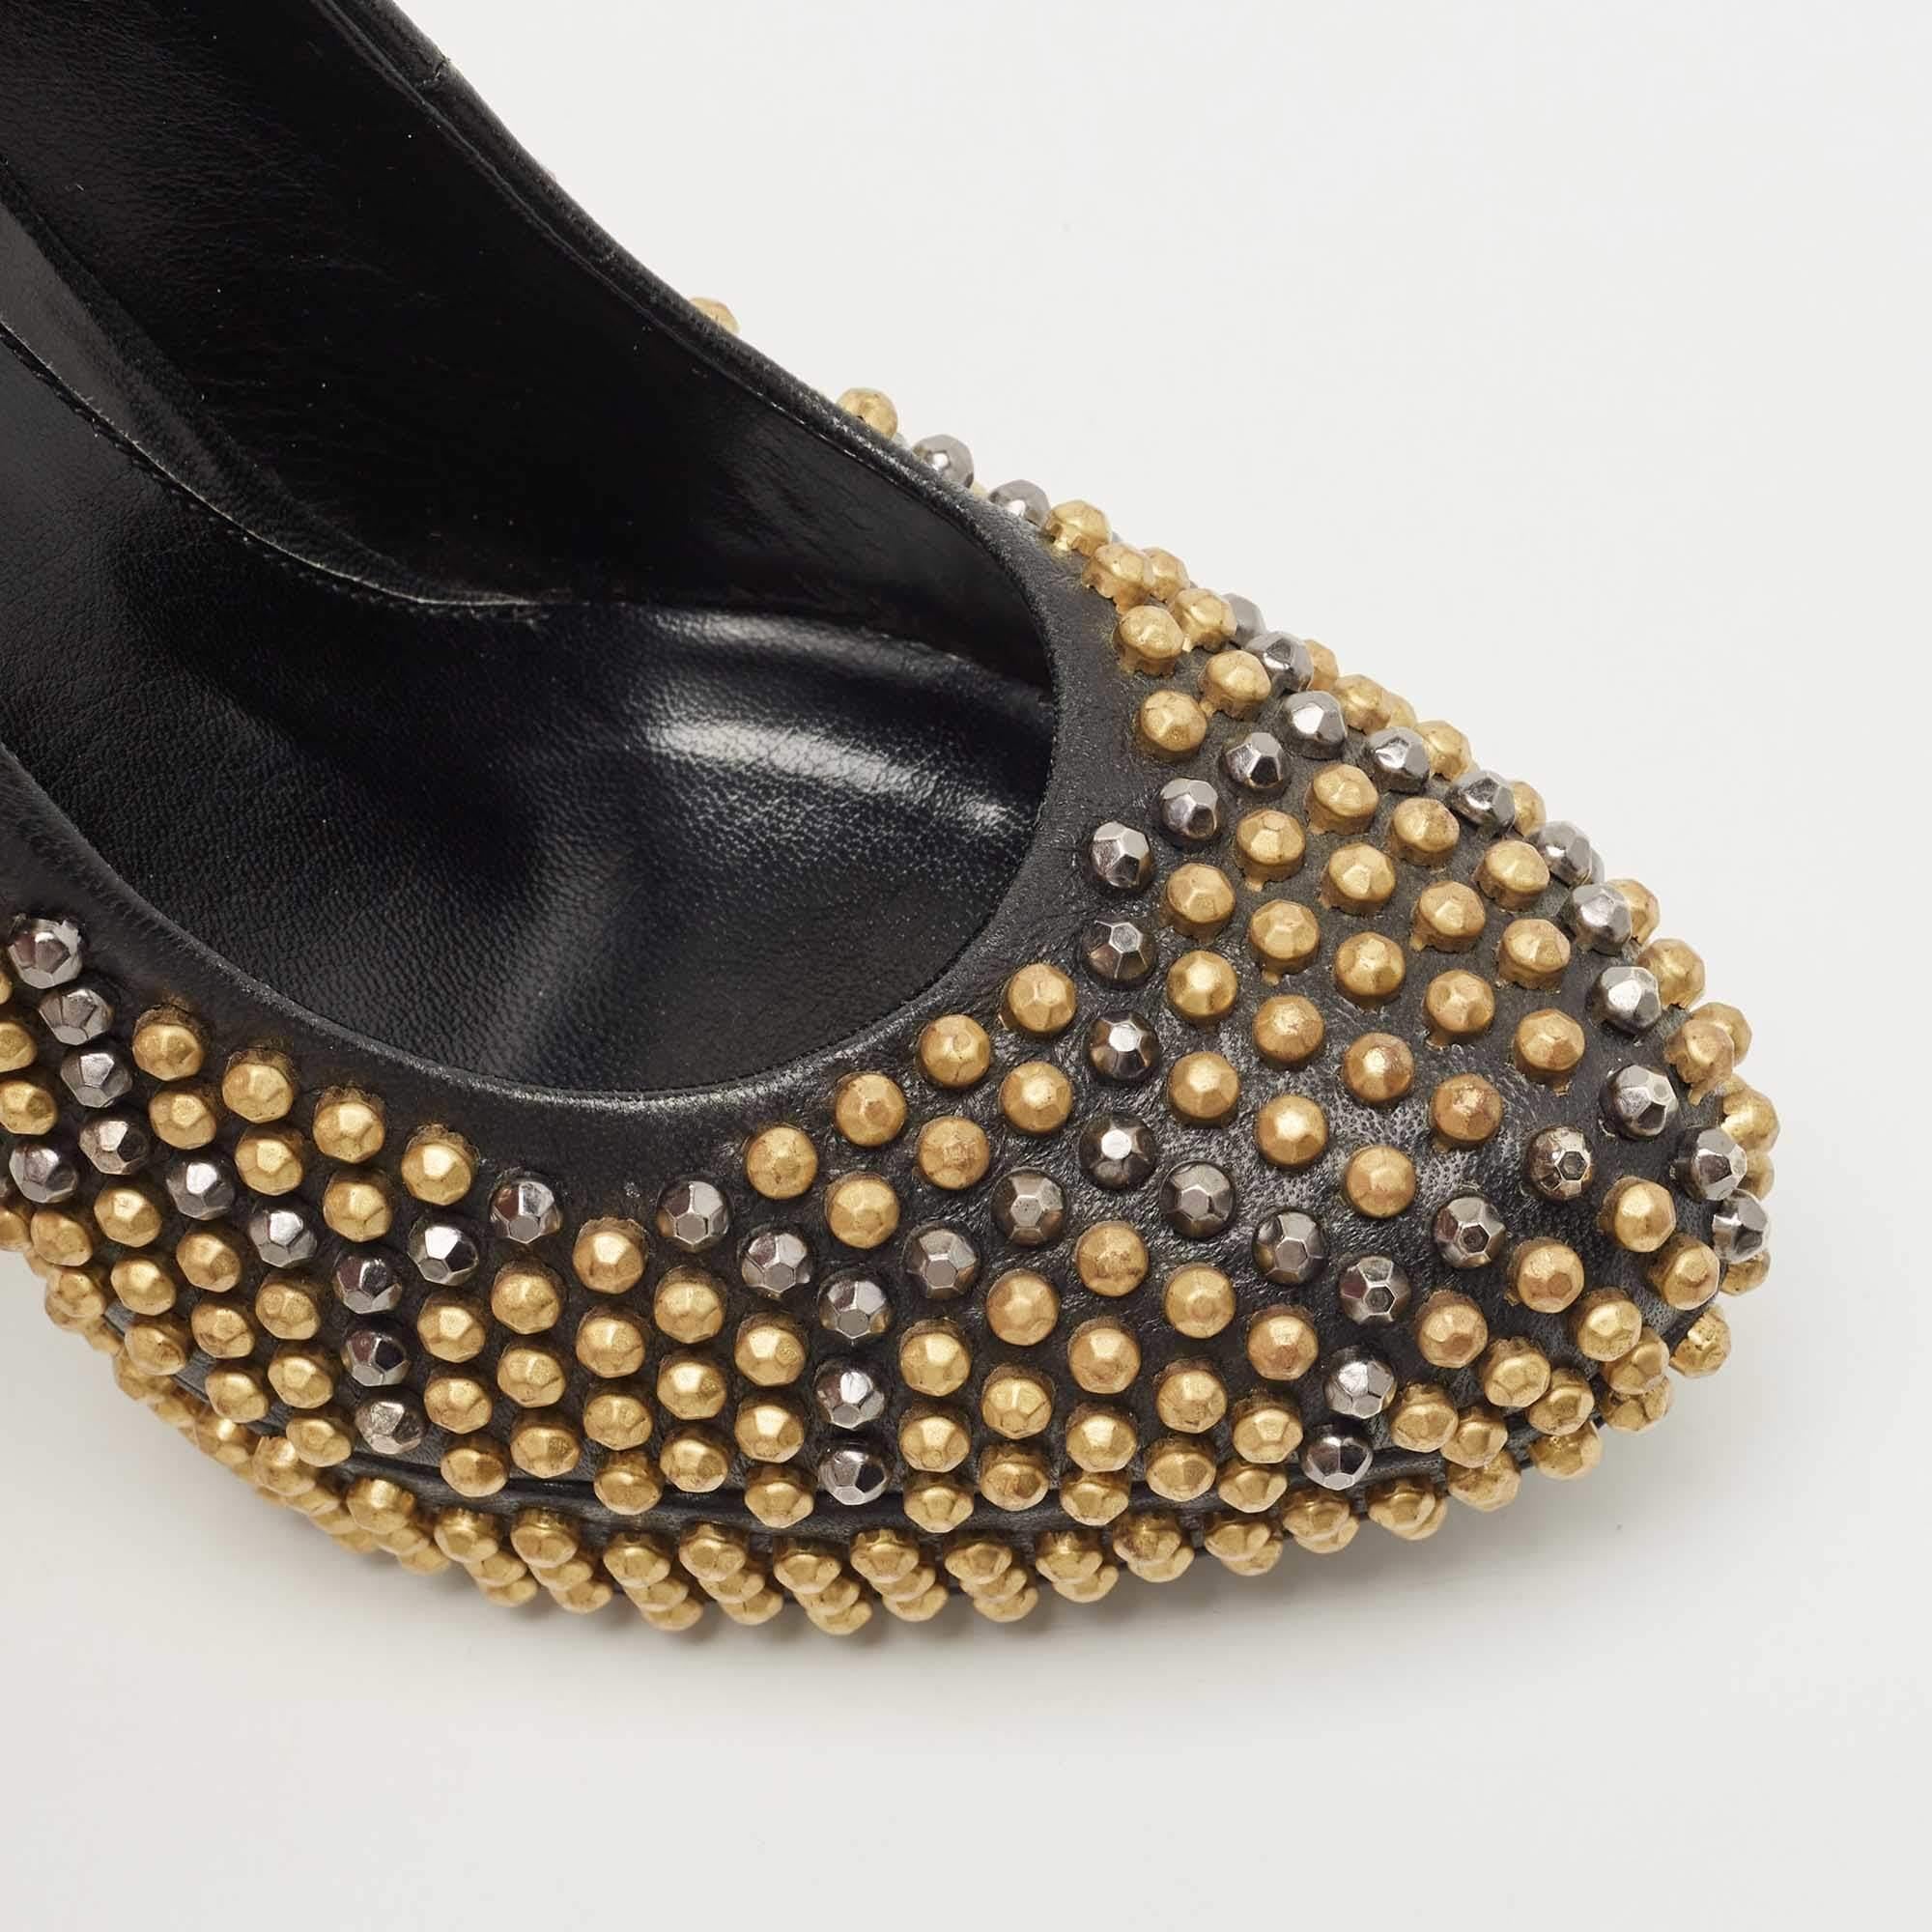 Alexander McQueen Black Leather Studded Pumps Size 37.5 3